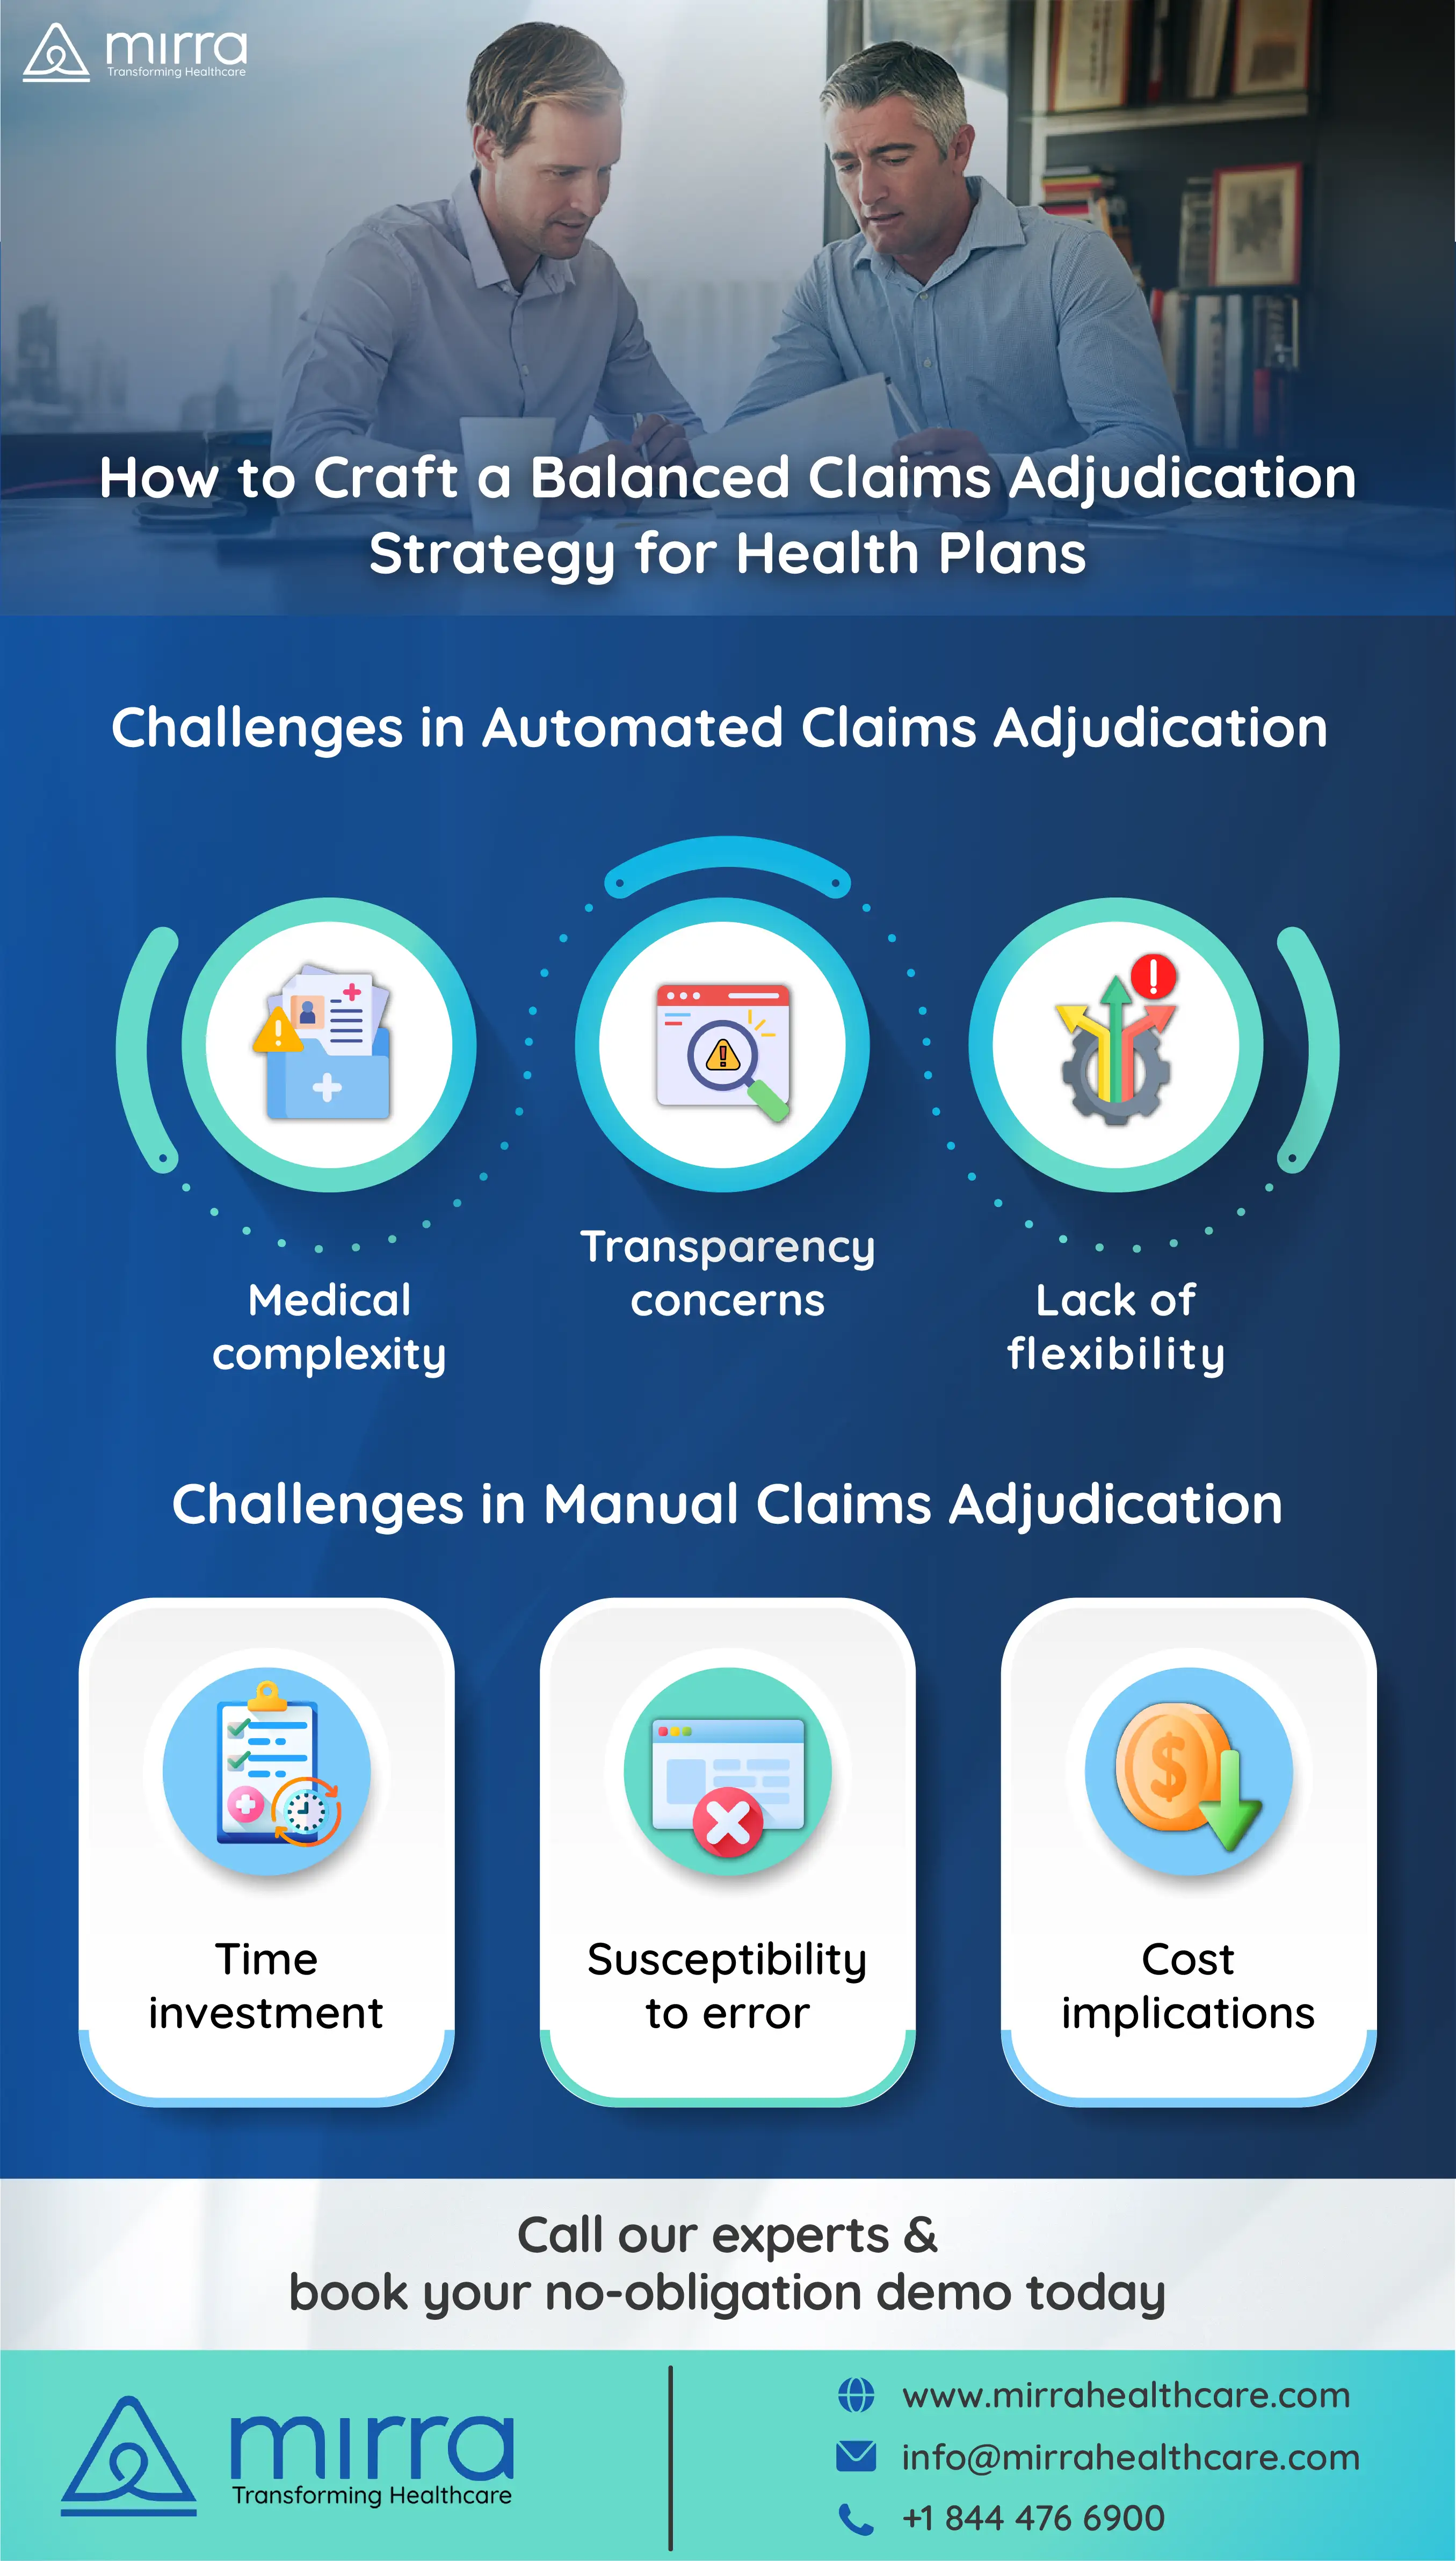 Enhance Your Claims Processing with Mirra's Advanced Technology Solution